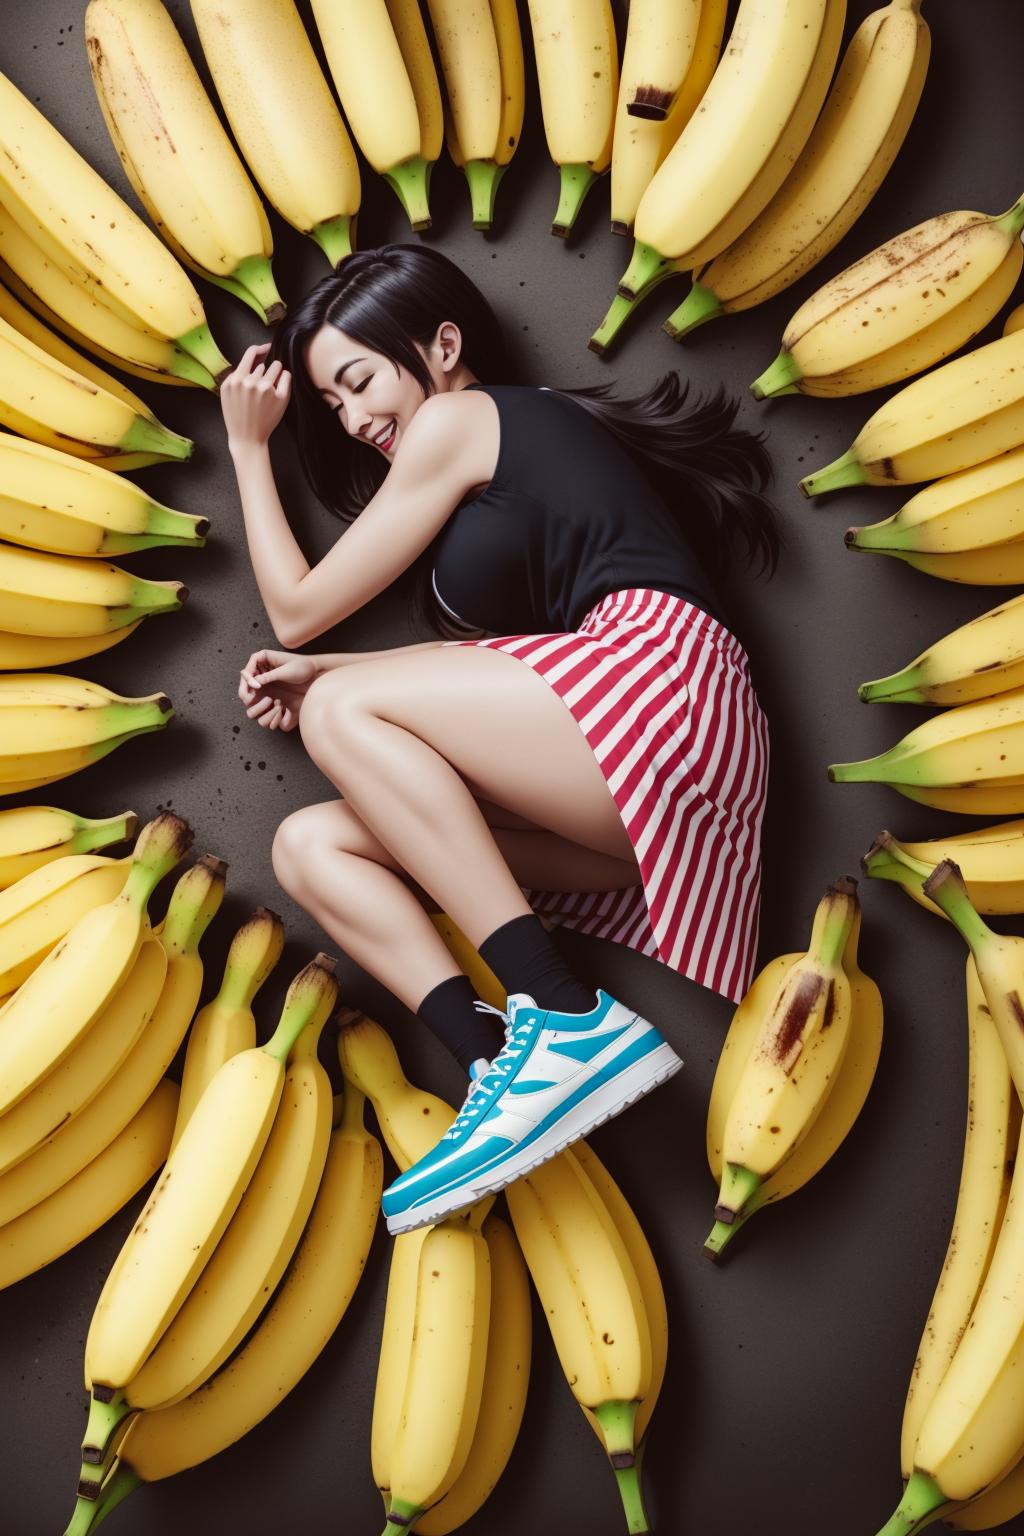 A girl with a blue and white shoe, posing with a bunch of bananas.